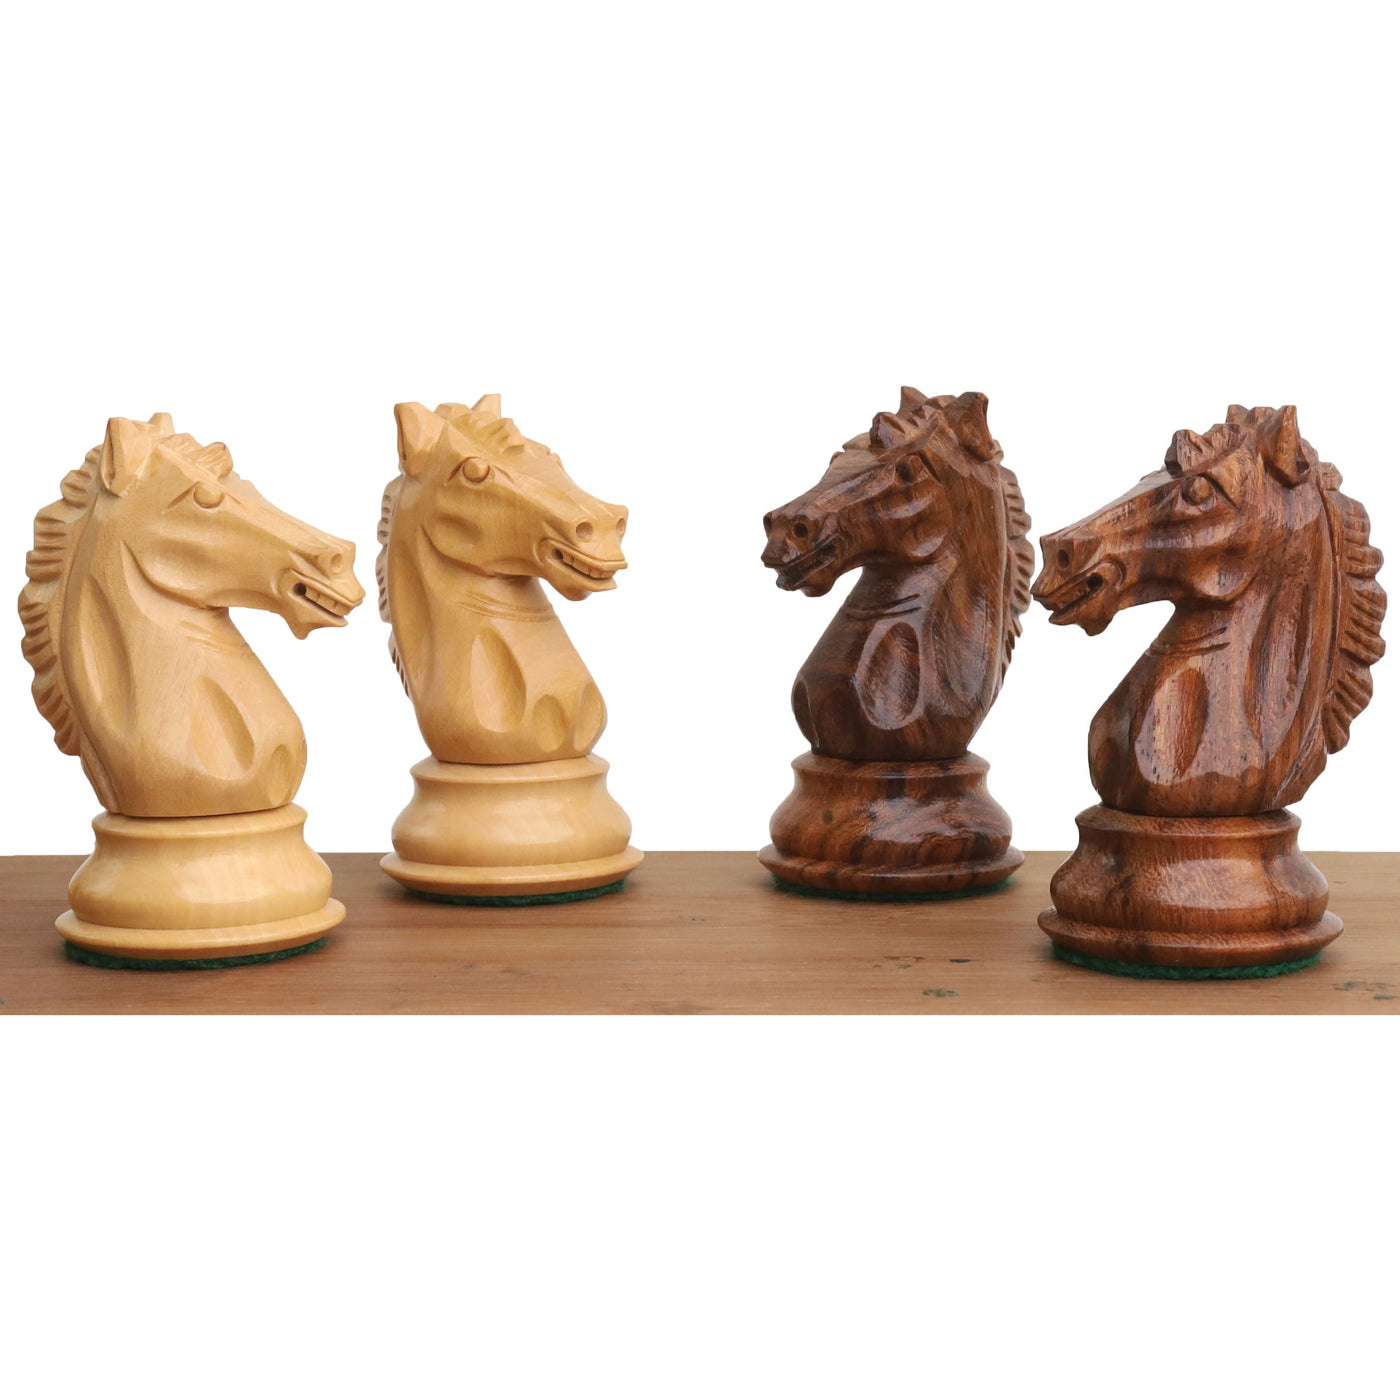 4" Alban Knight Staunton Chess Set - Chess Pieces Only - Weighted Golden Rosewood